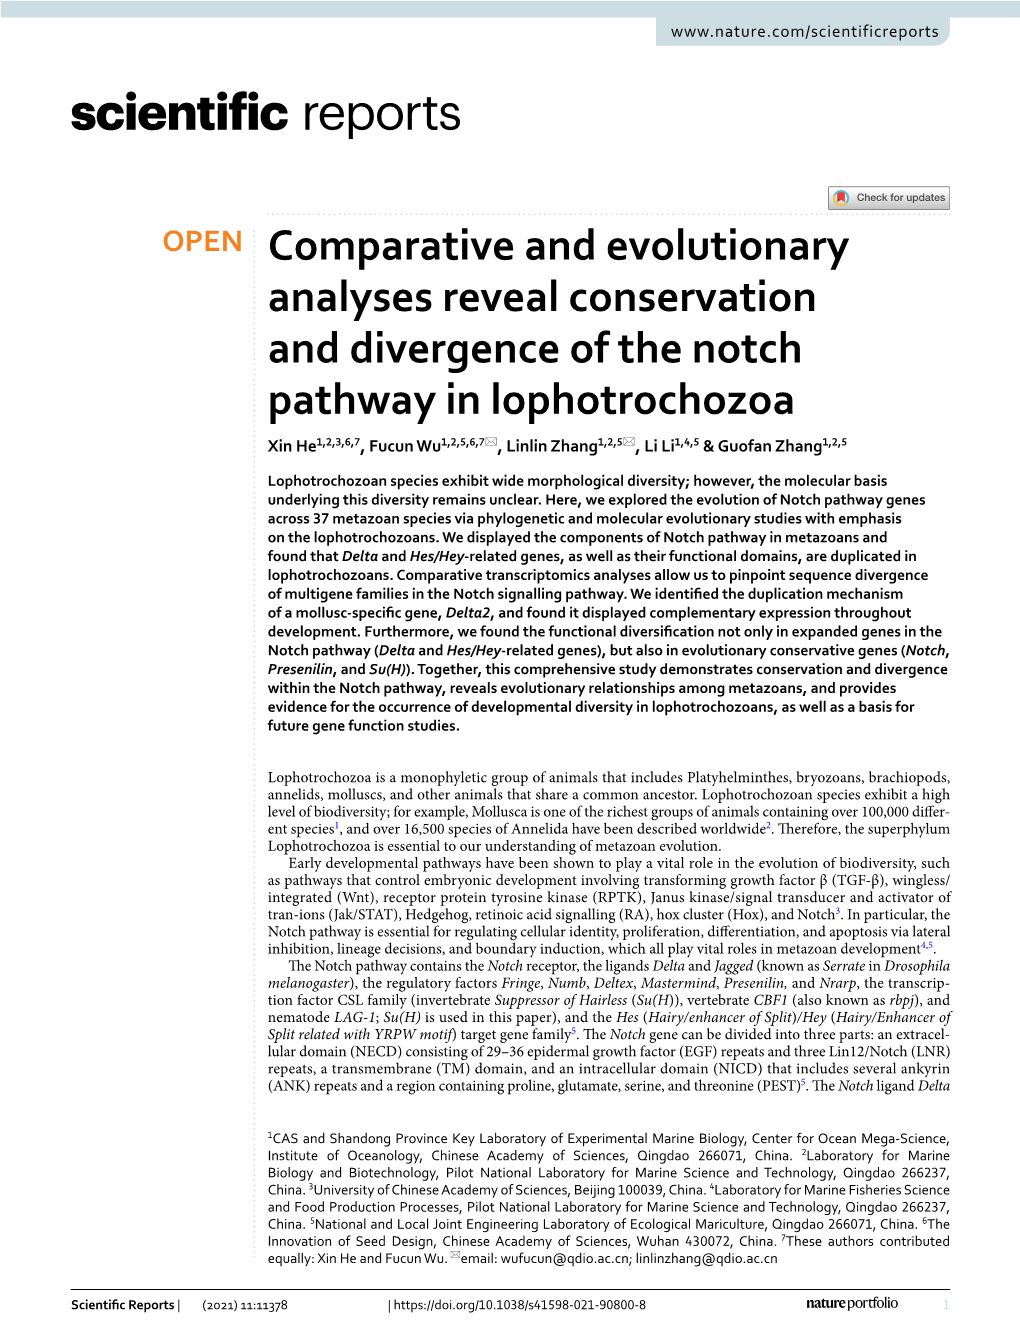 Comparative and Evolutionary Analyses Reveal Conservation and Divergence of the Notch Pathway in Lophotrochozoa